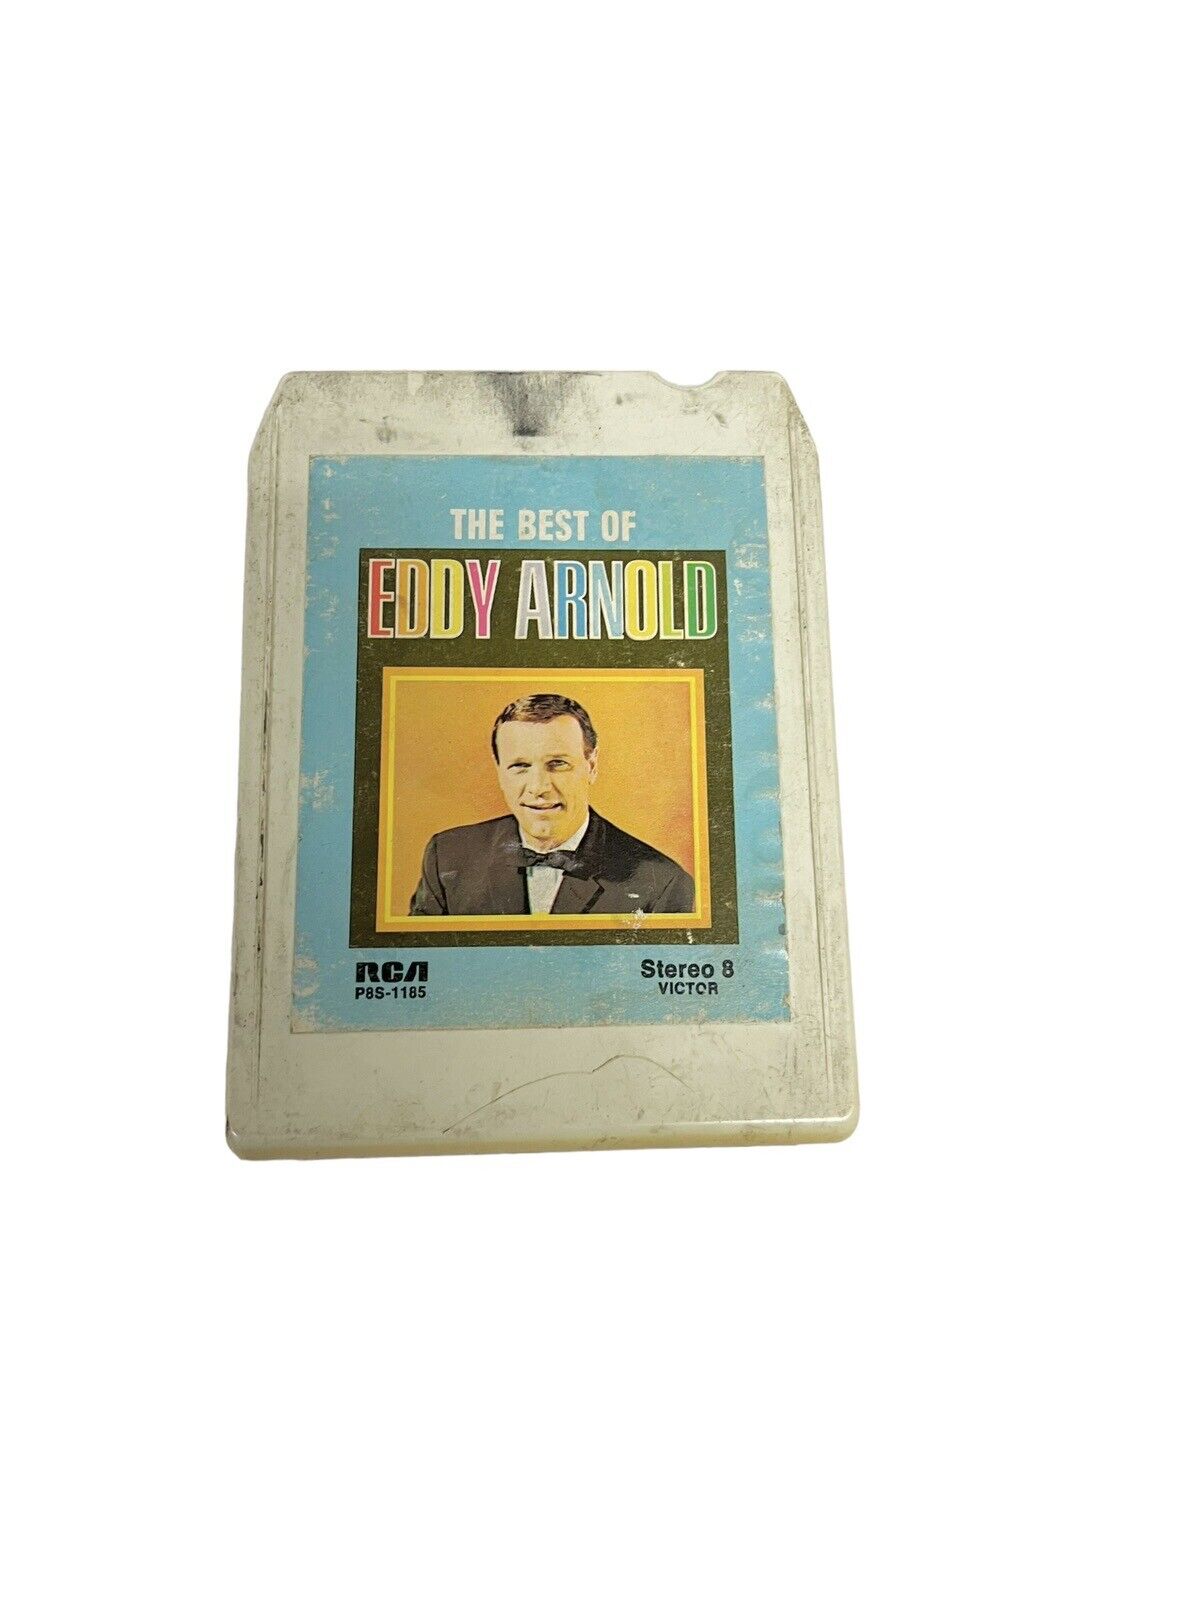 VINTAGE THE BEST OF EDDY ARNOLD 8-TRACK TAPE 1966 RCA P8S-1185